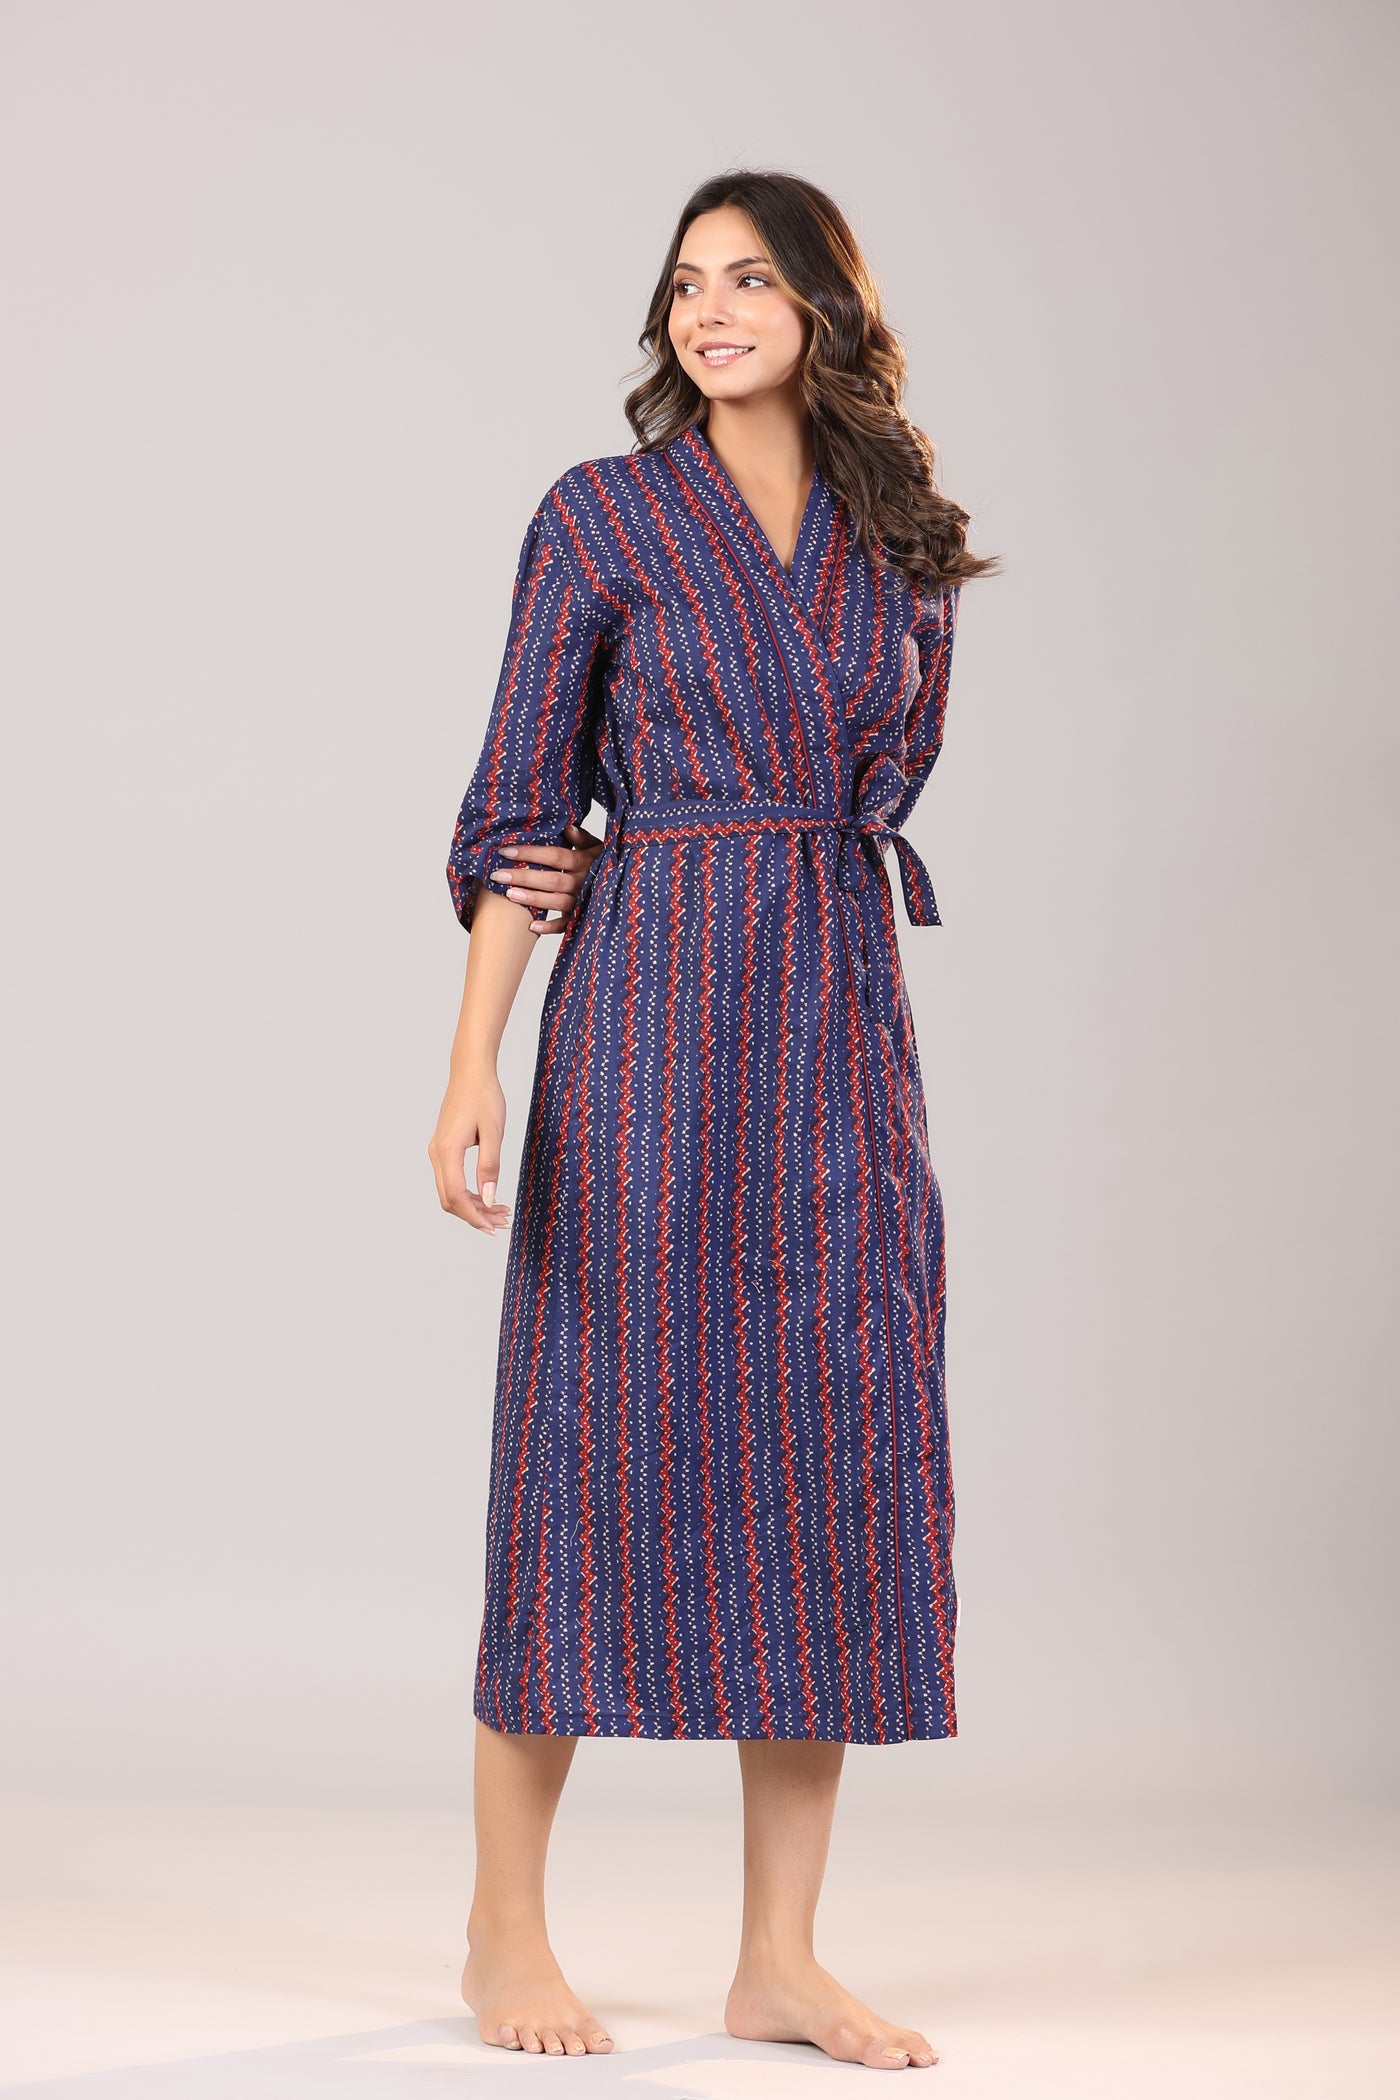 Parallel Zigzag on Blue Cotton Robe